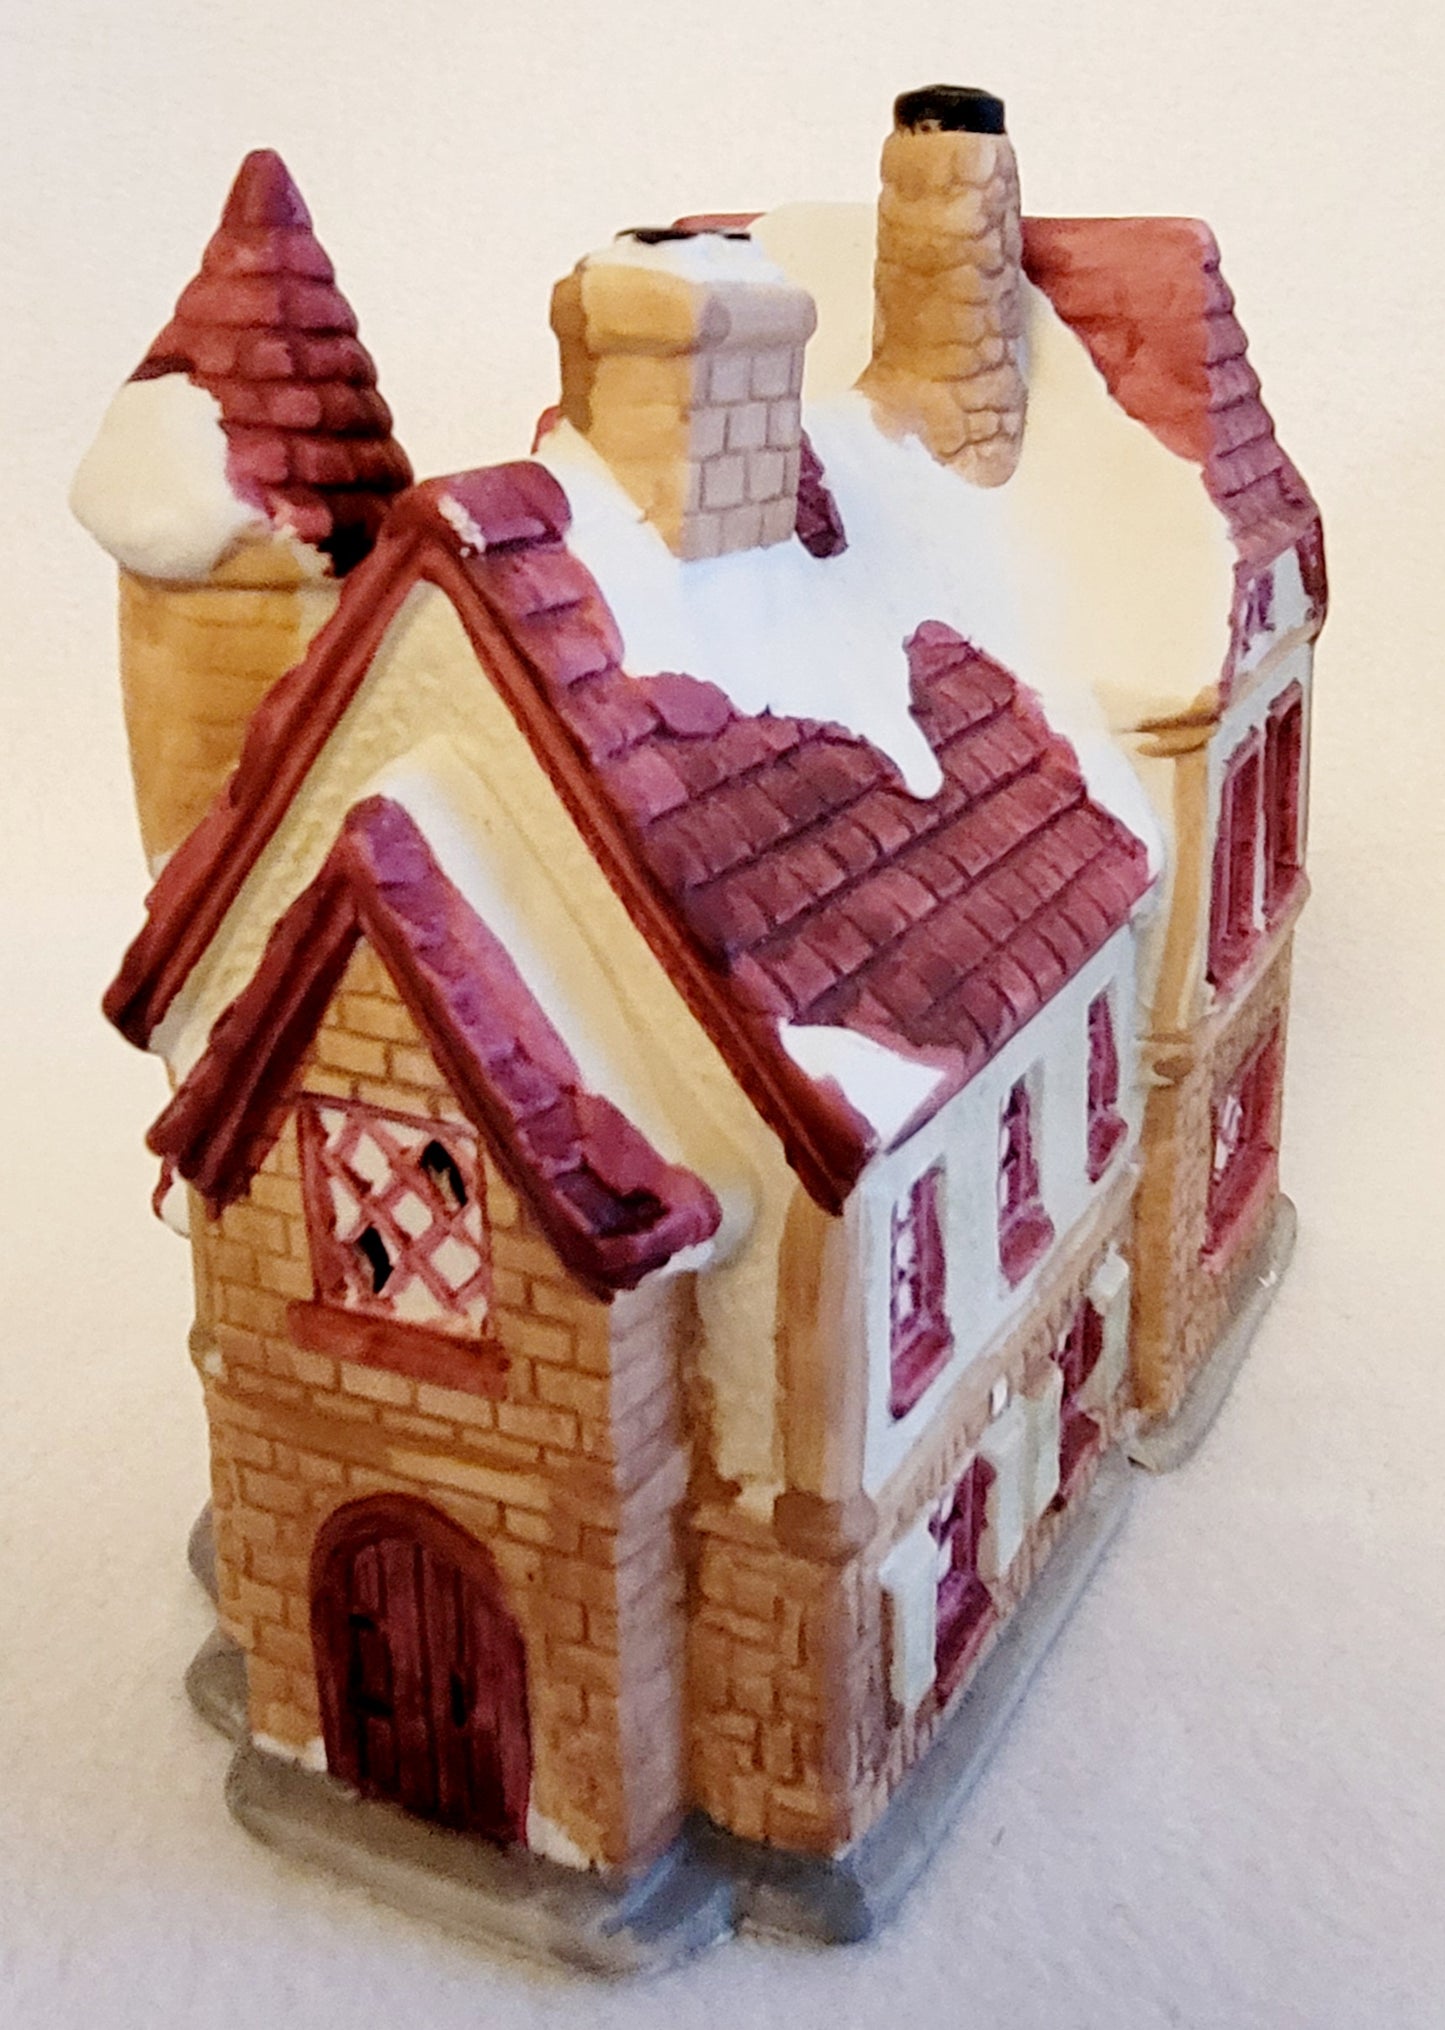 North Pole Village Addition ~ Santa's House for Christmas